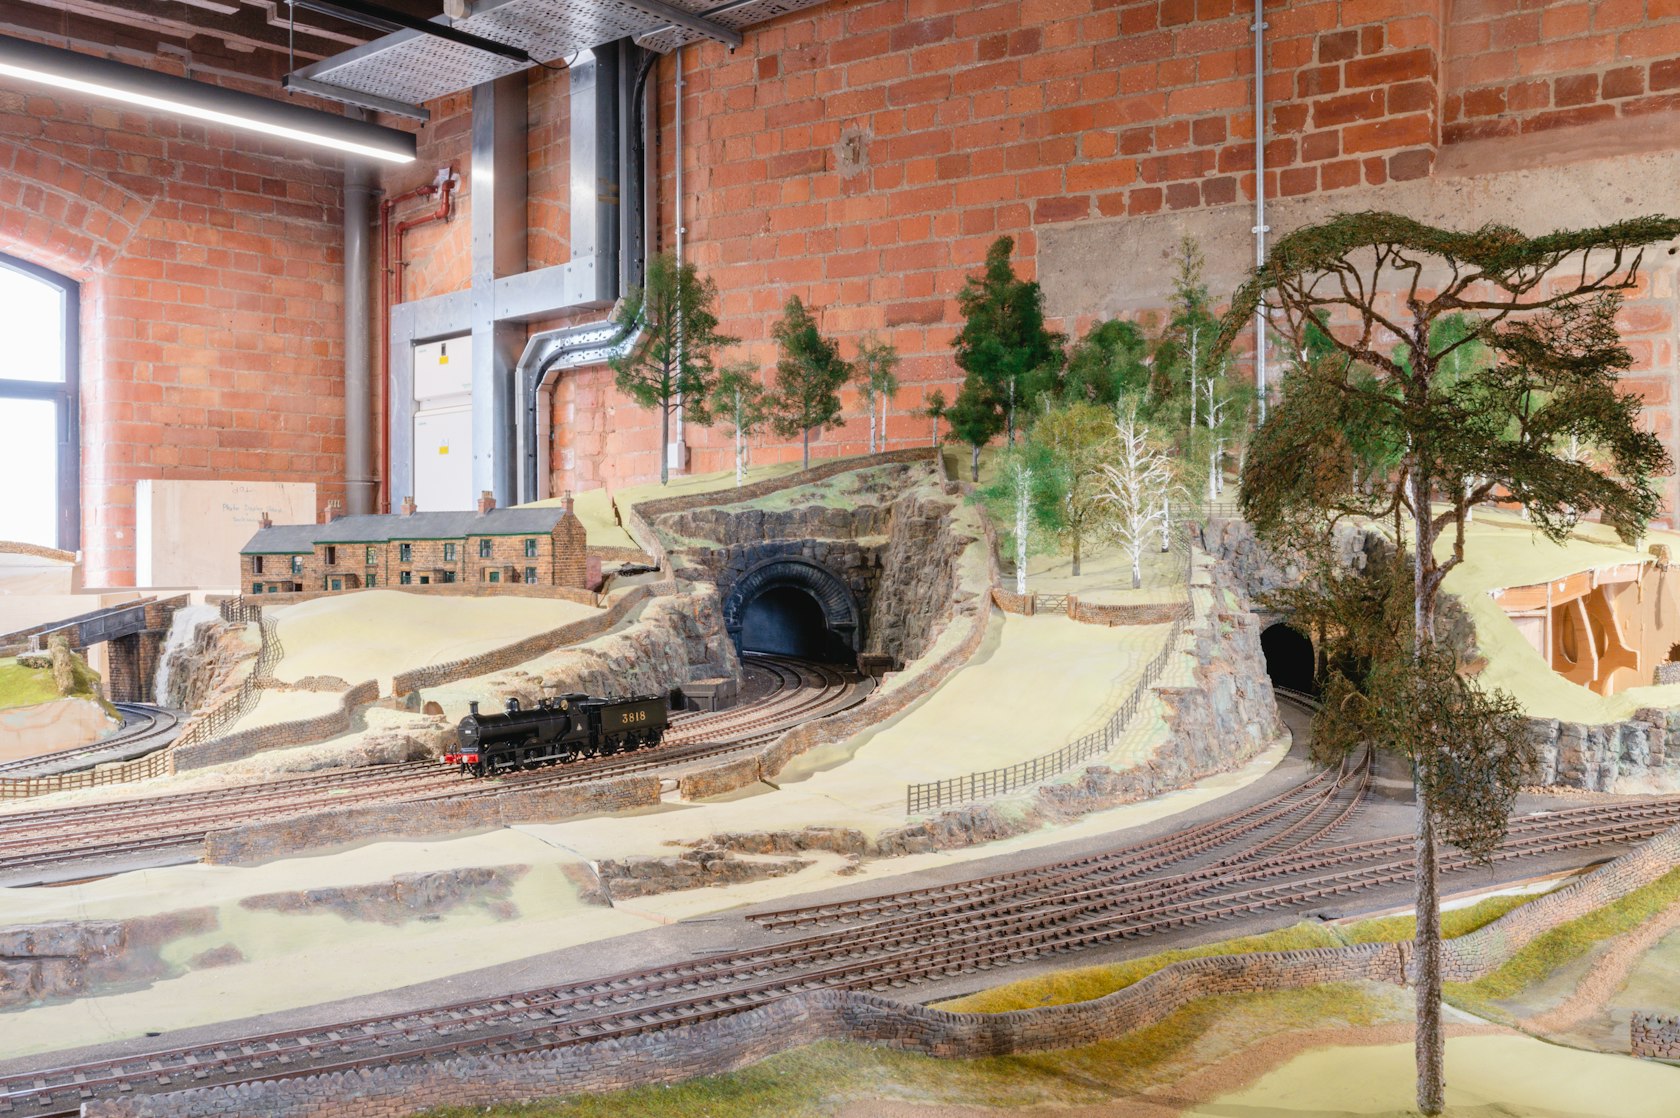 Railways Revealed at the Museum of Making – image 78 [c] Speller Metcalfe-Derby Museums